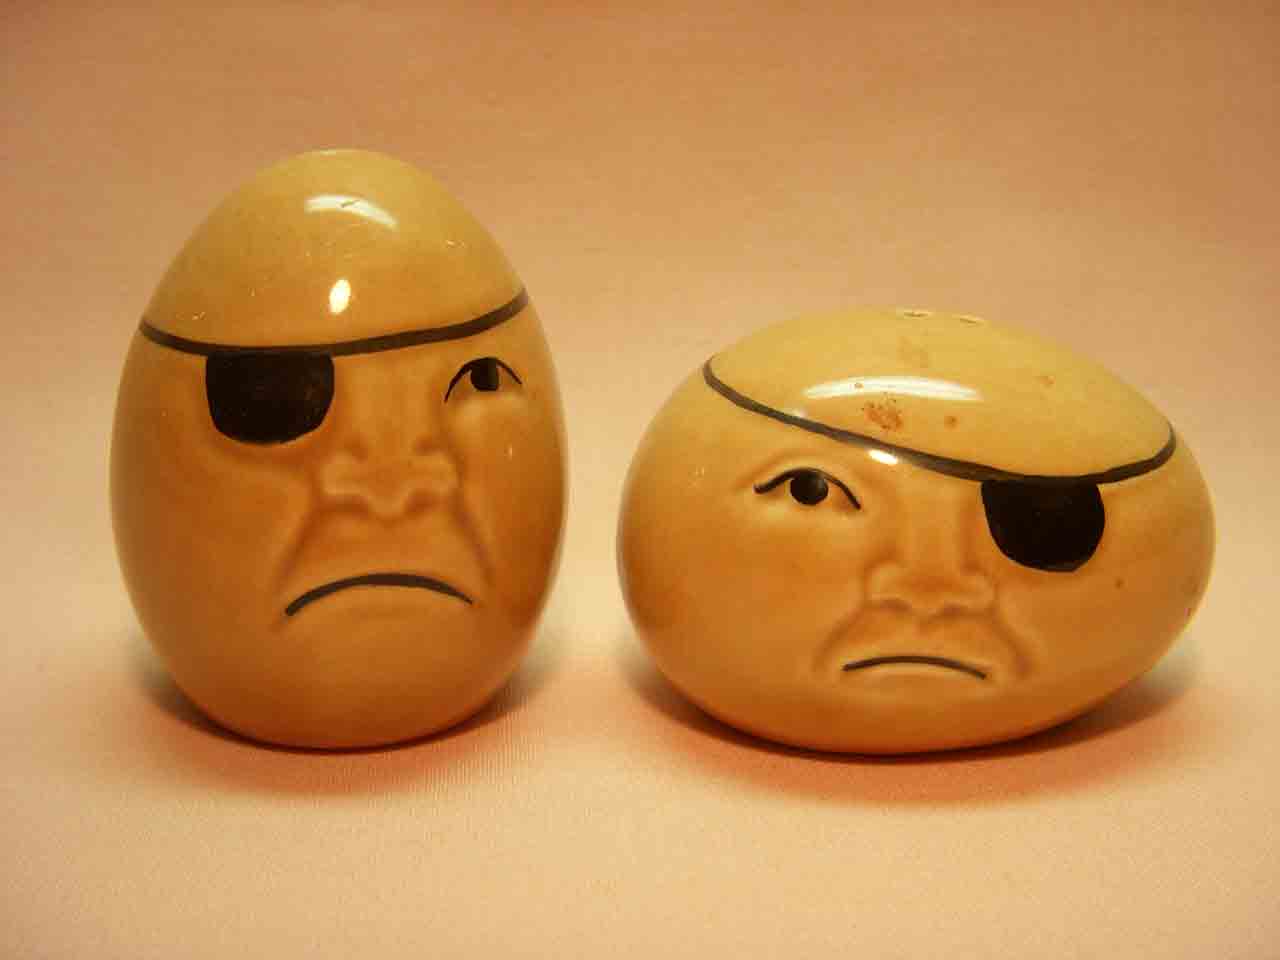 Vallona Starr couple of bad eggs salt and pepper shakers